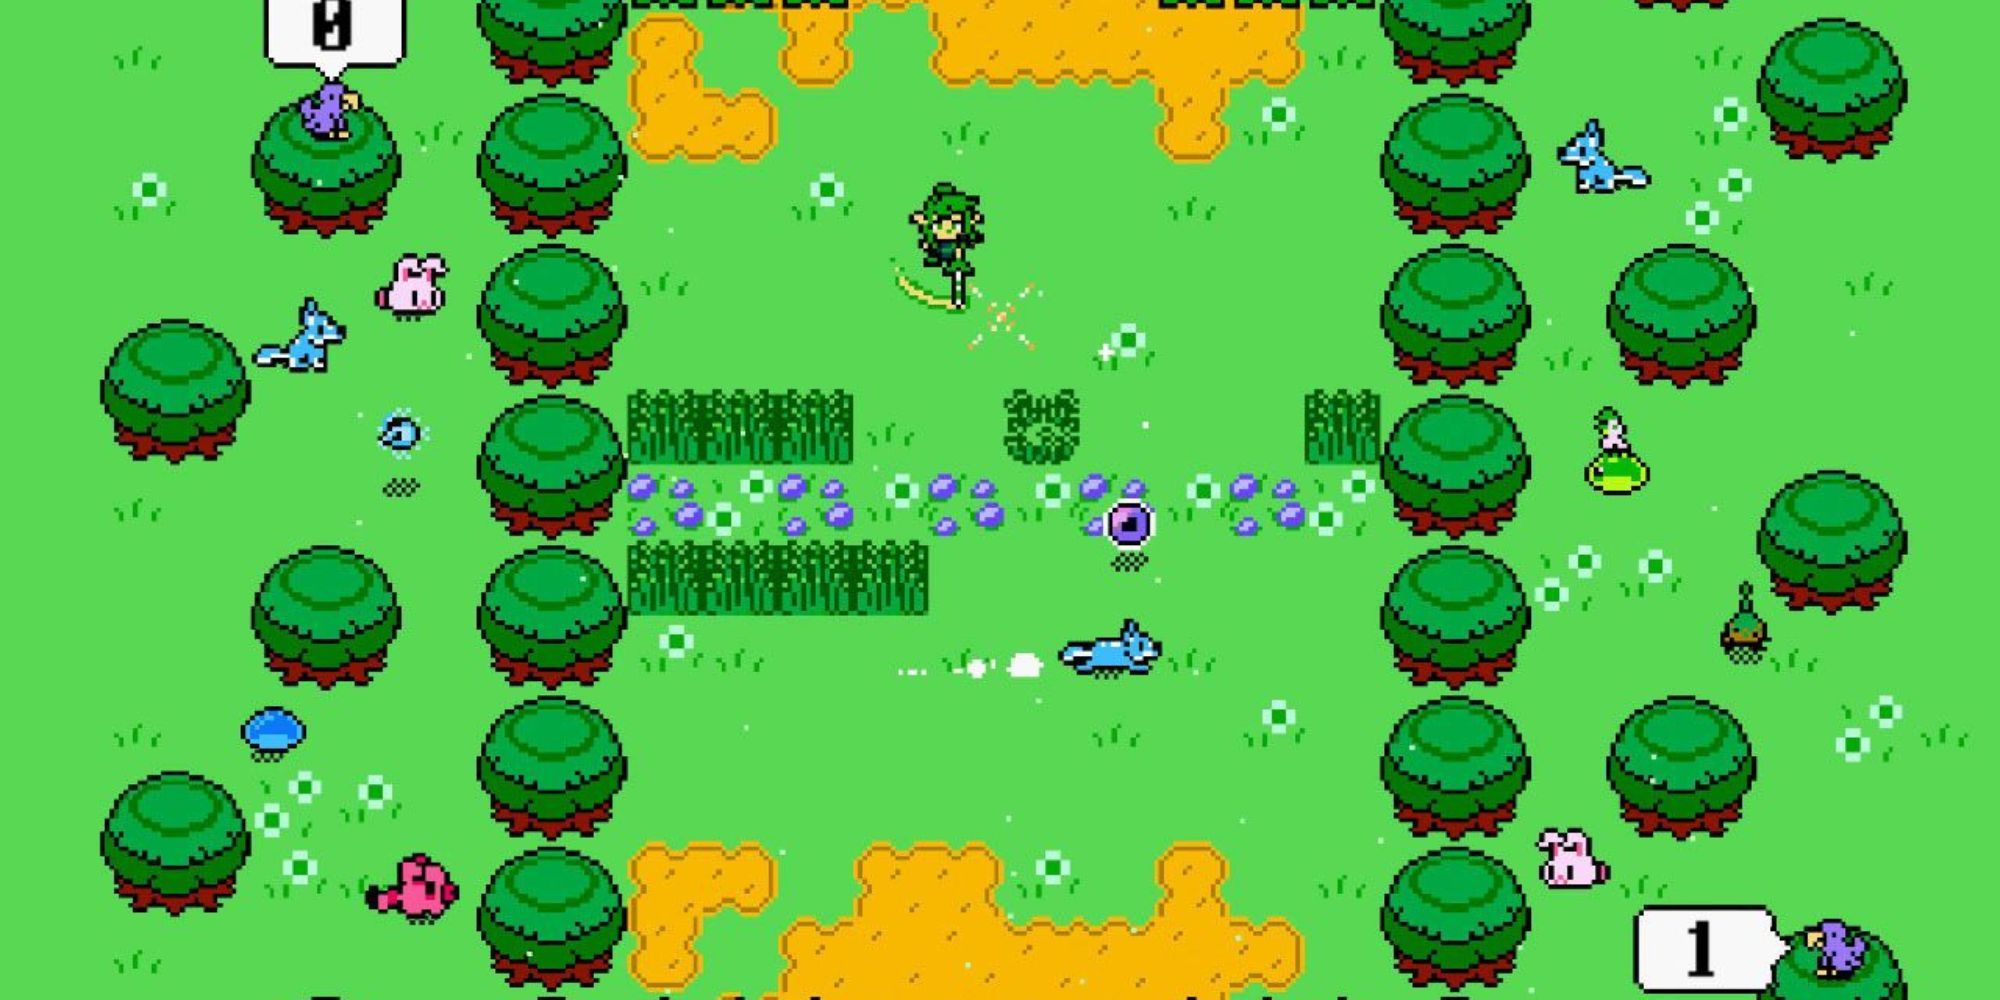 A green character throws a ball towards a blue dog in the woods in SpiritSphere DX